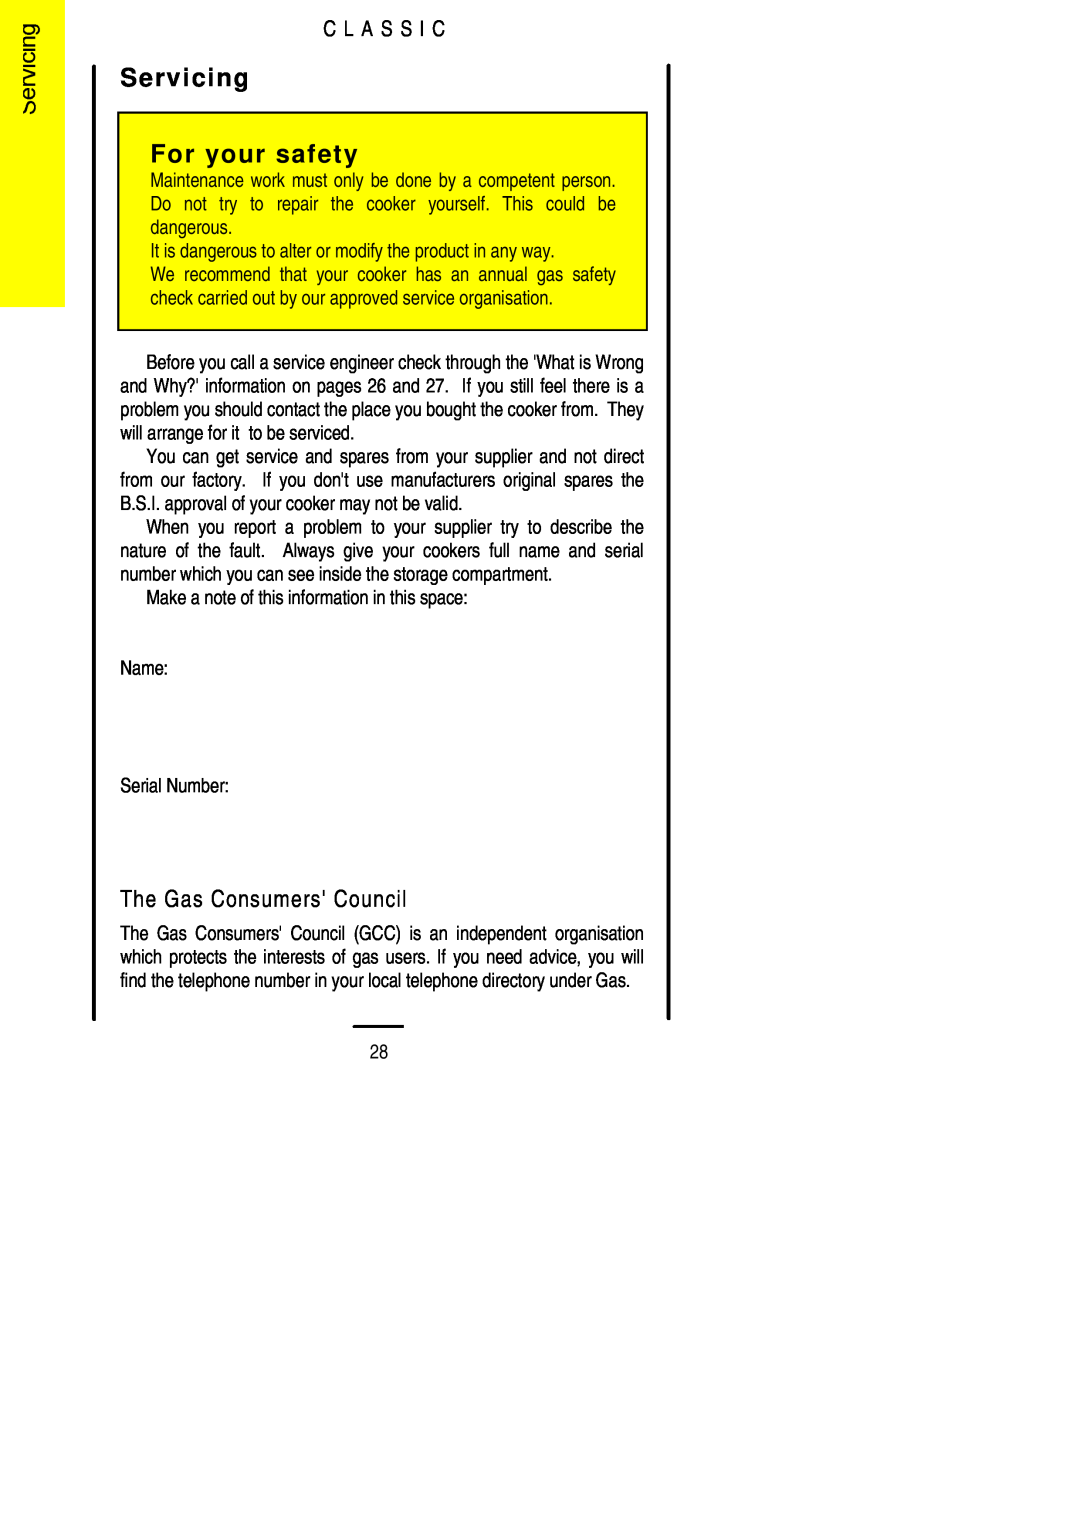 Parkinson Cowan U02021 installation instructions Servicing For your safety, The Gas Consumers Council, C L A S S I C 